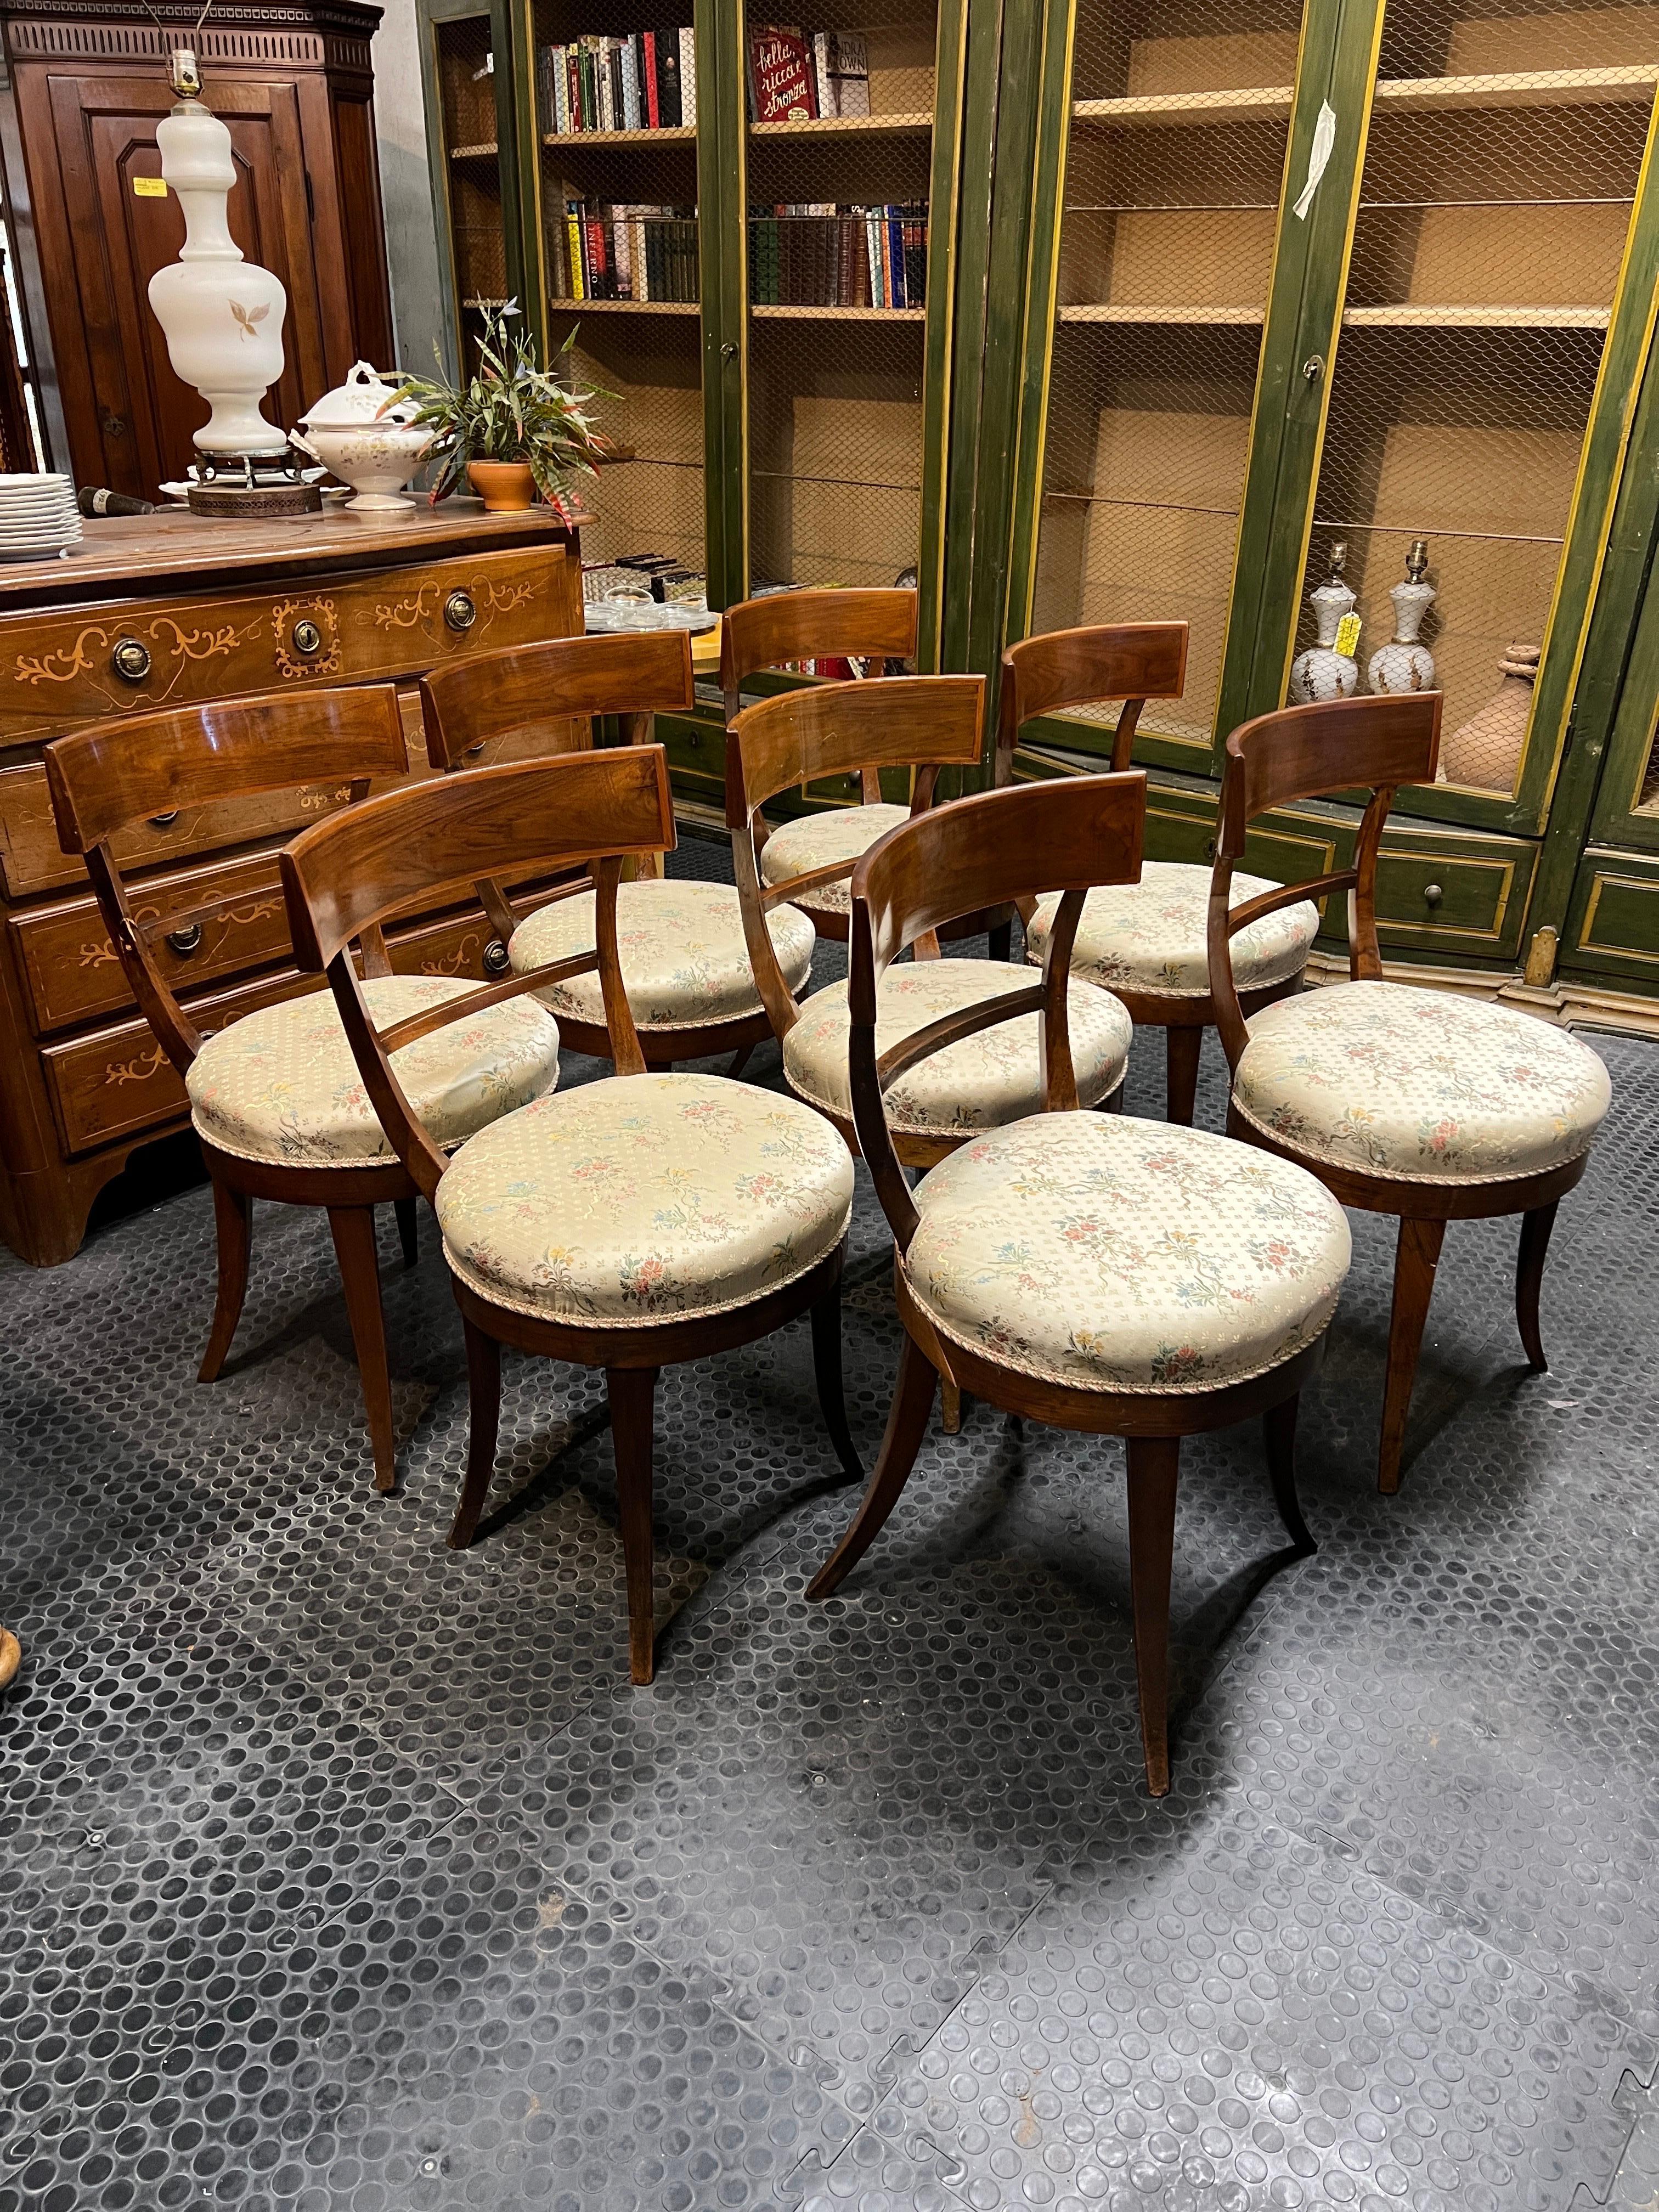 Group of Eight Italian walnut chairs, inlaid with fruit wood, Campania region , likely from the city of Naples.
Circular shape with an arched back that makes back support comfortable and enveloping. Solid as a structure and have an elegant and very